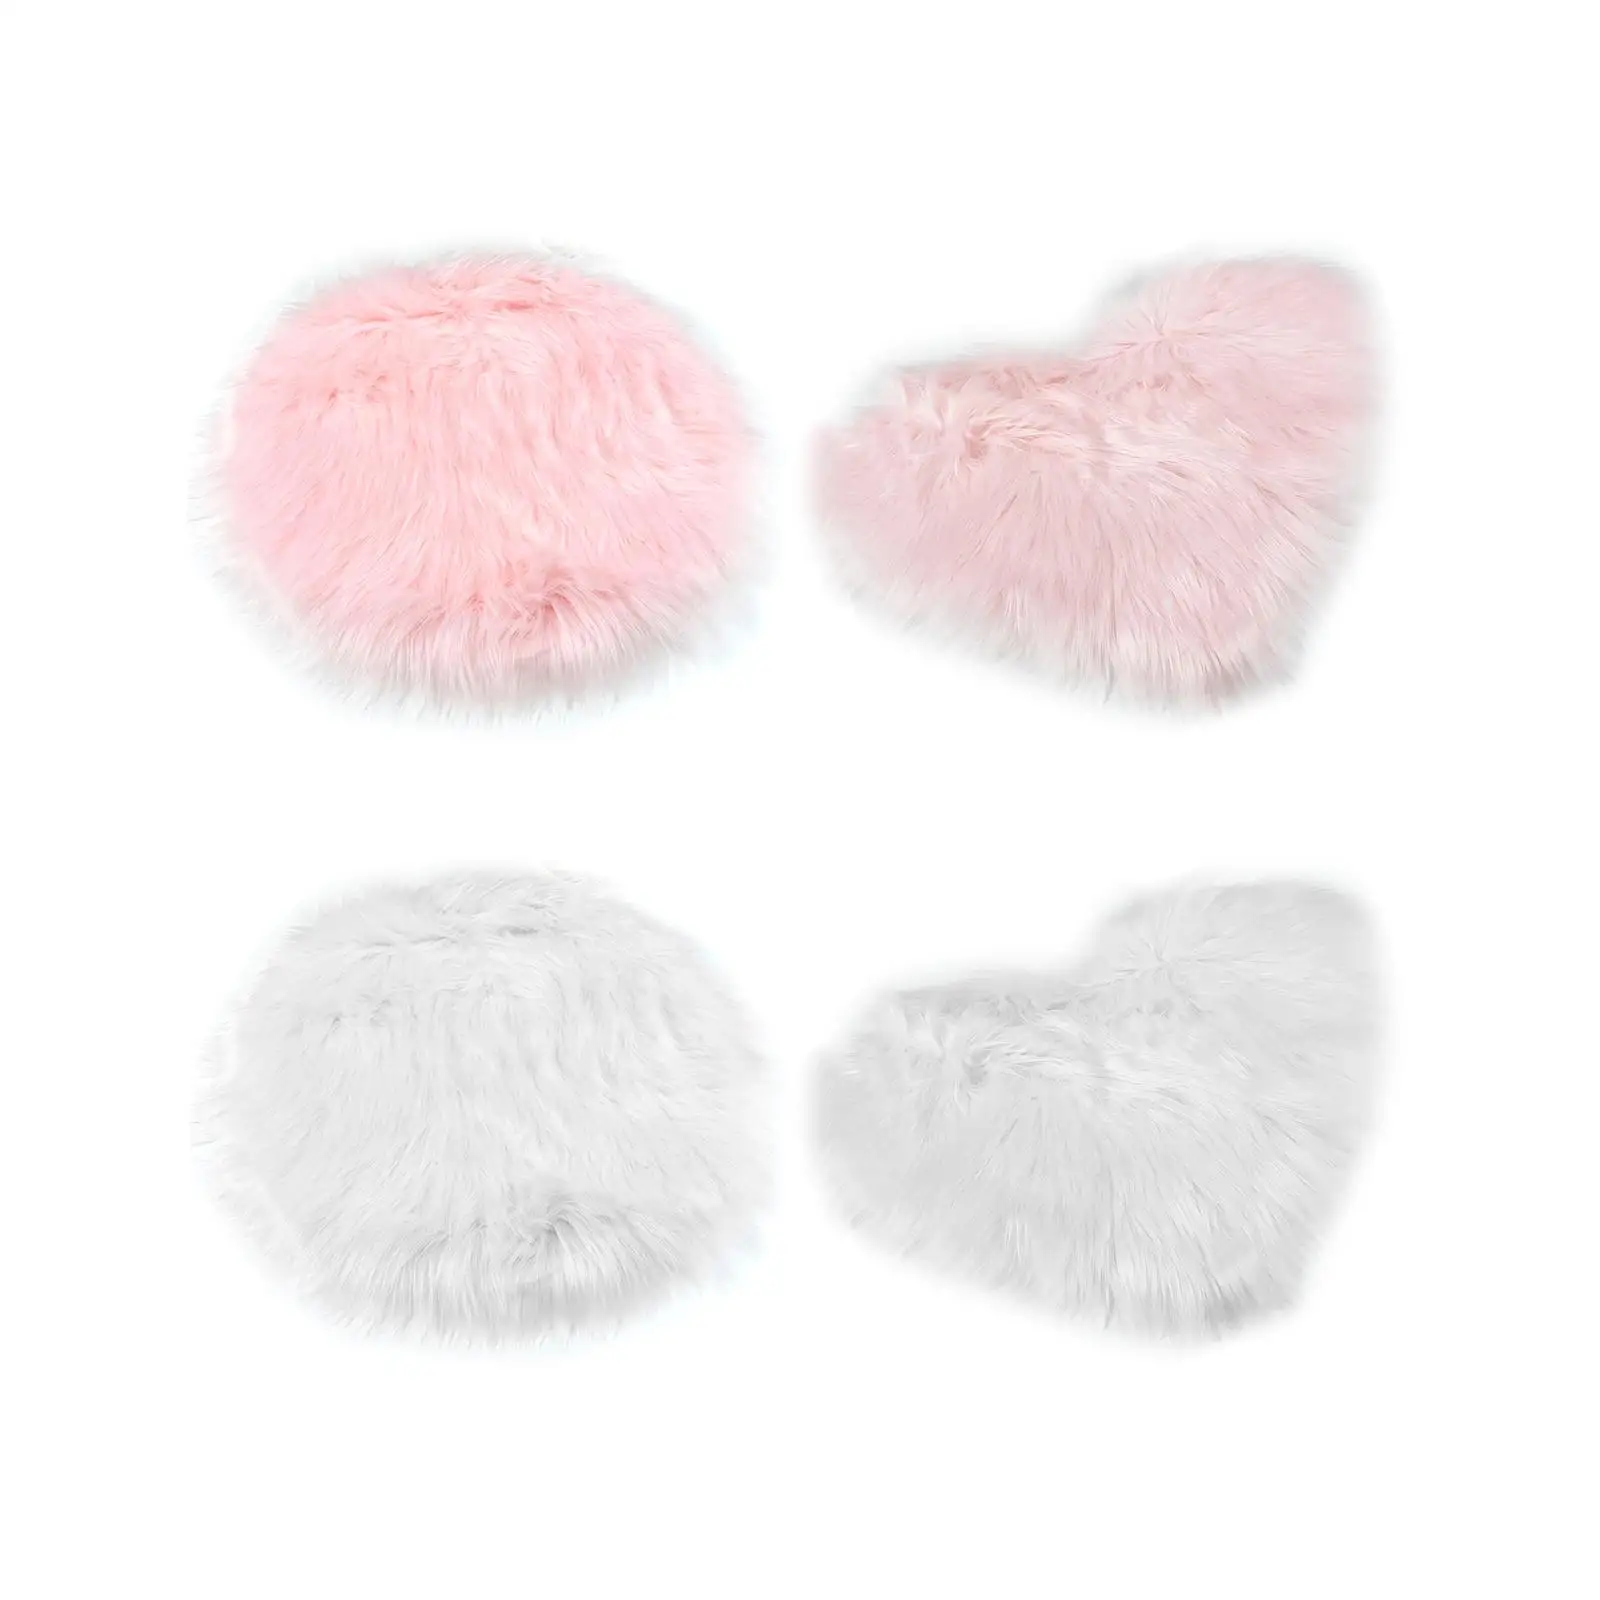 Soft Plush Area Rug Luxury Photo Props for Desktop Photography Nail Art